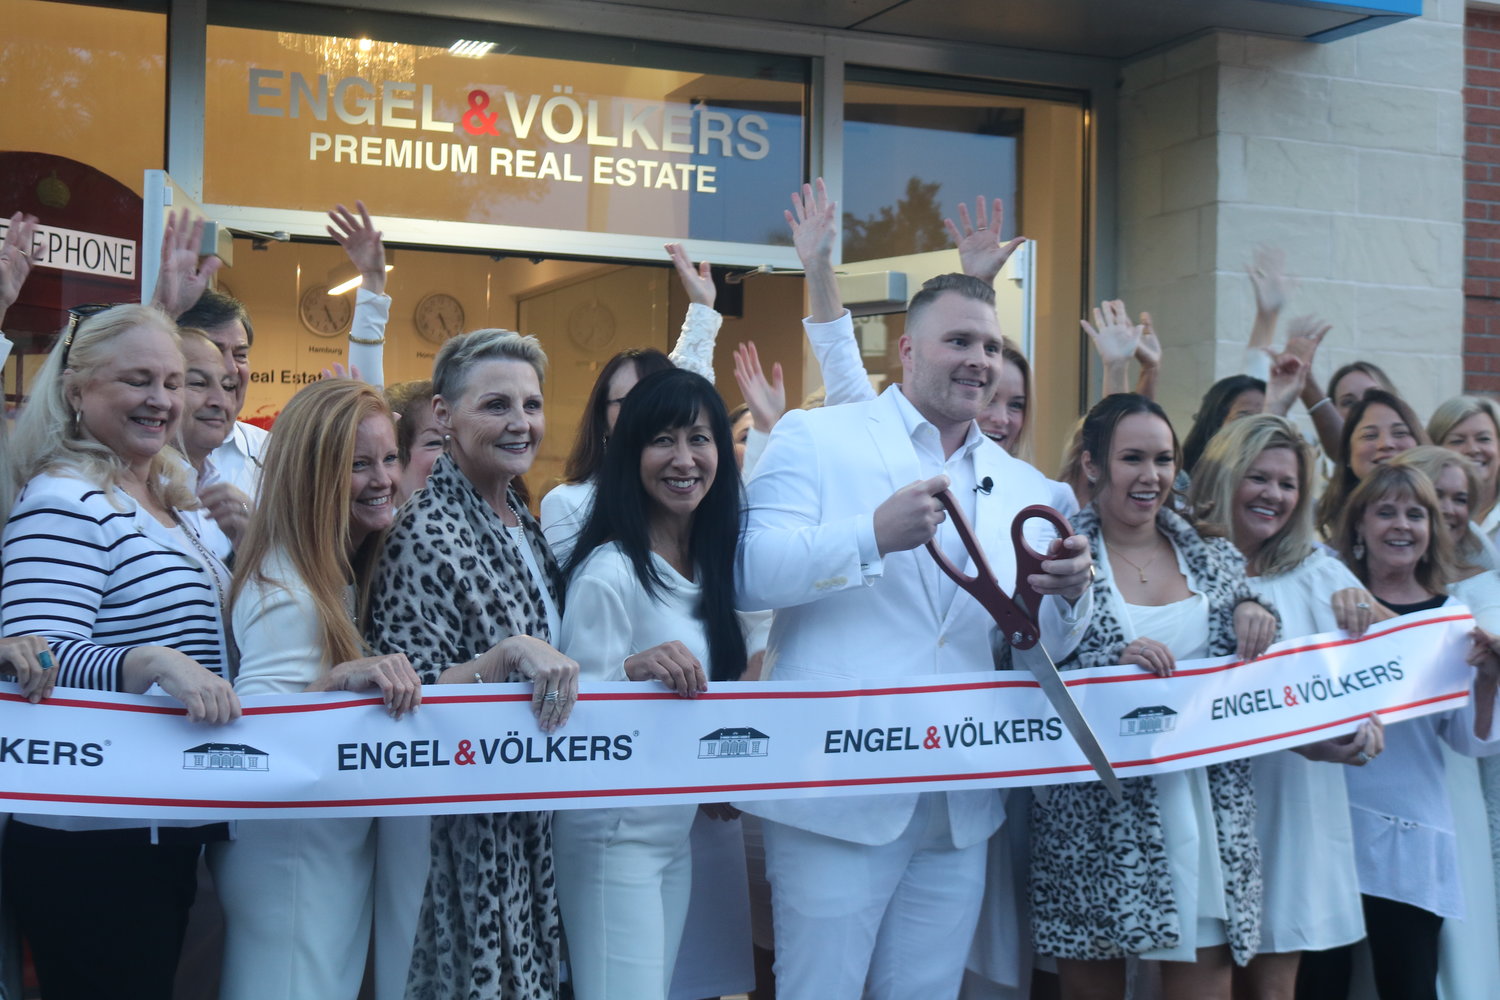 Corey Hasting cuts the ribbon during a ceremony to christen Engel & Volkers’ new Ponte Vedra Beach location Nov. 17.